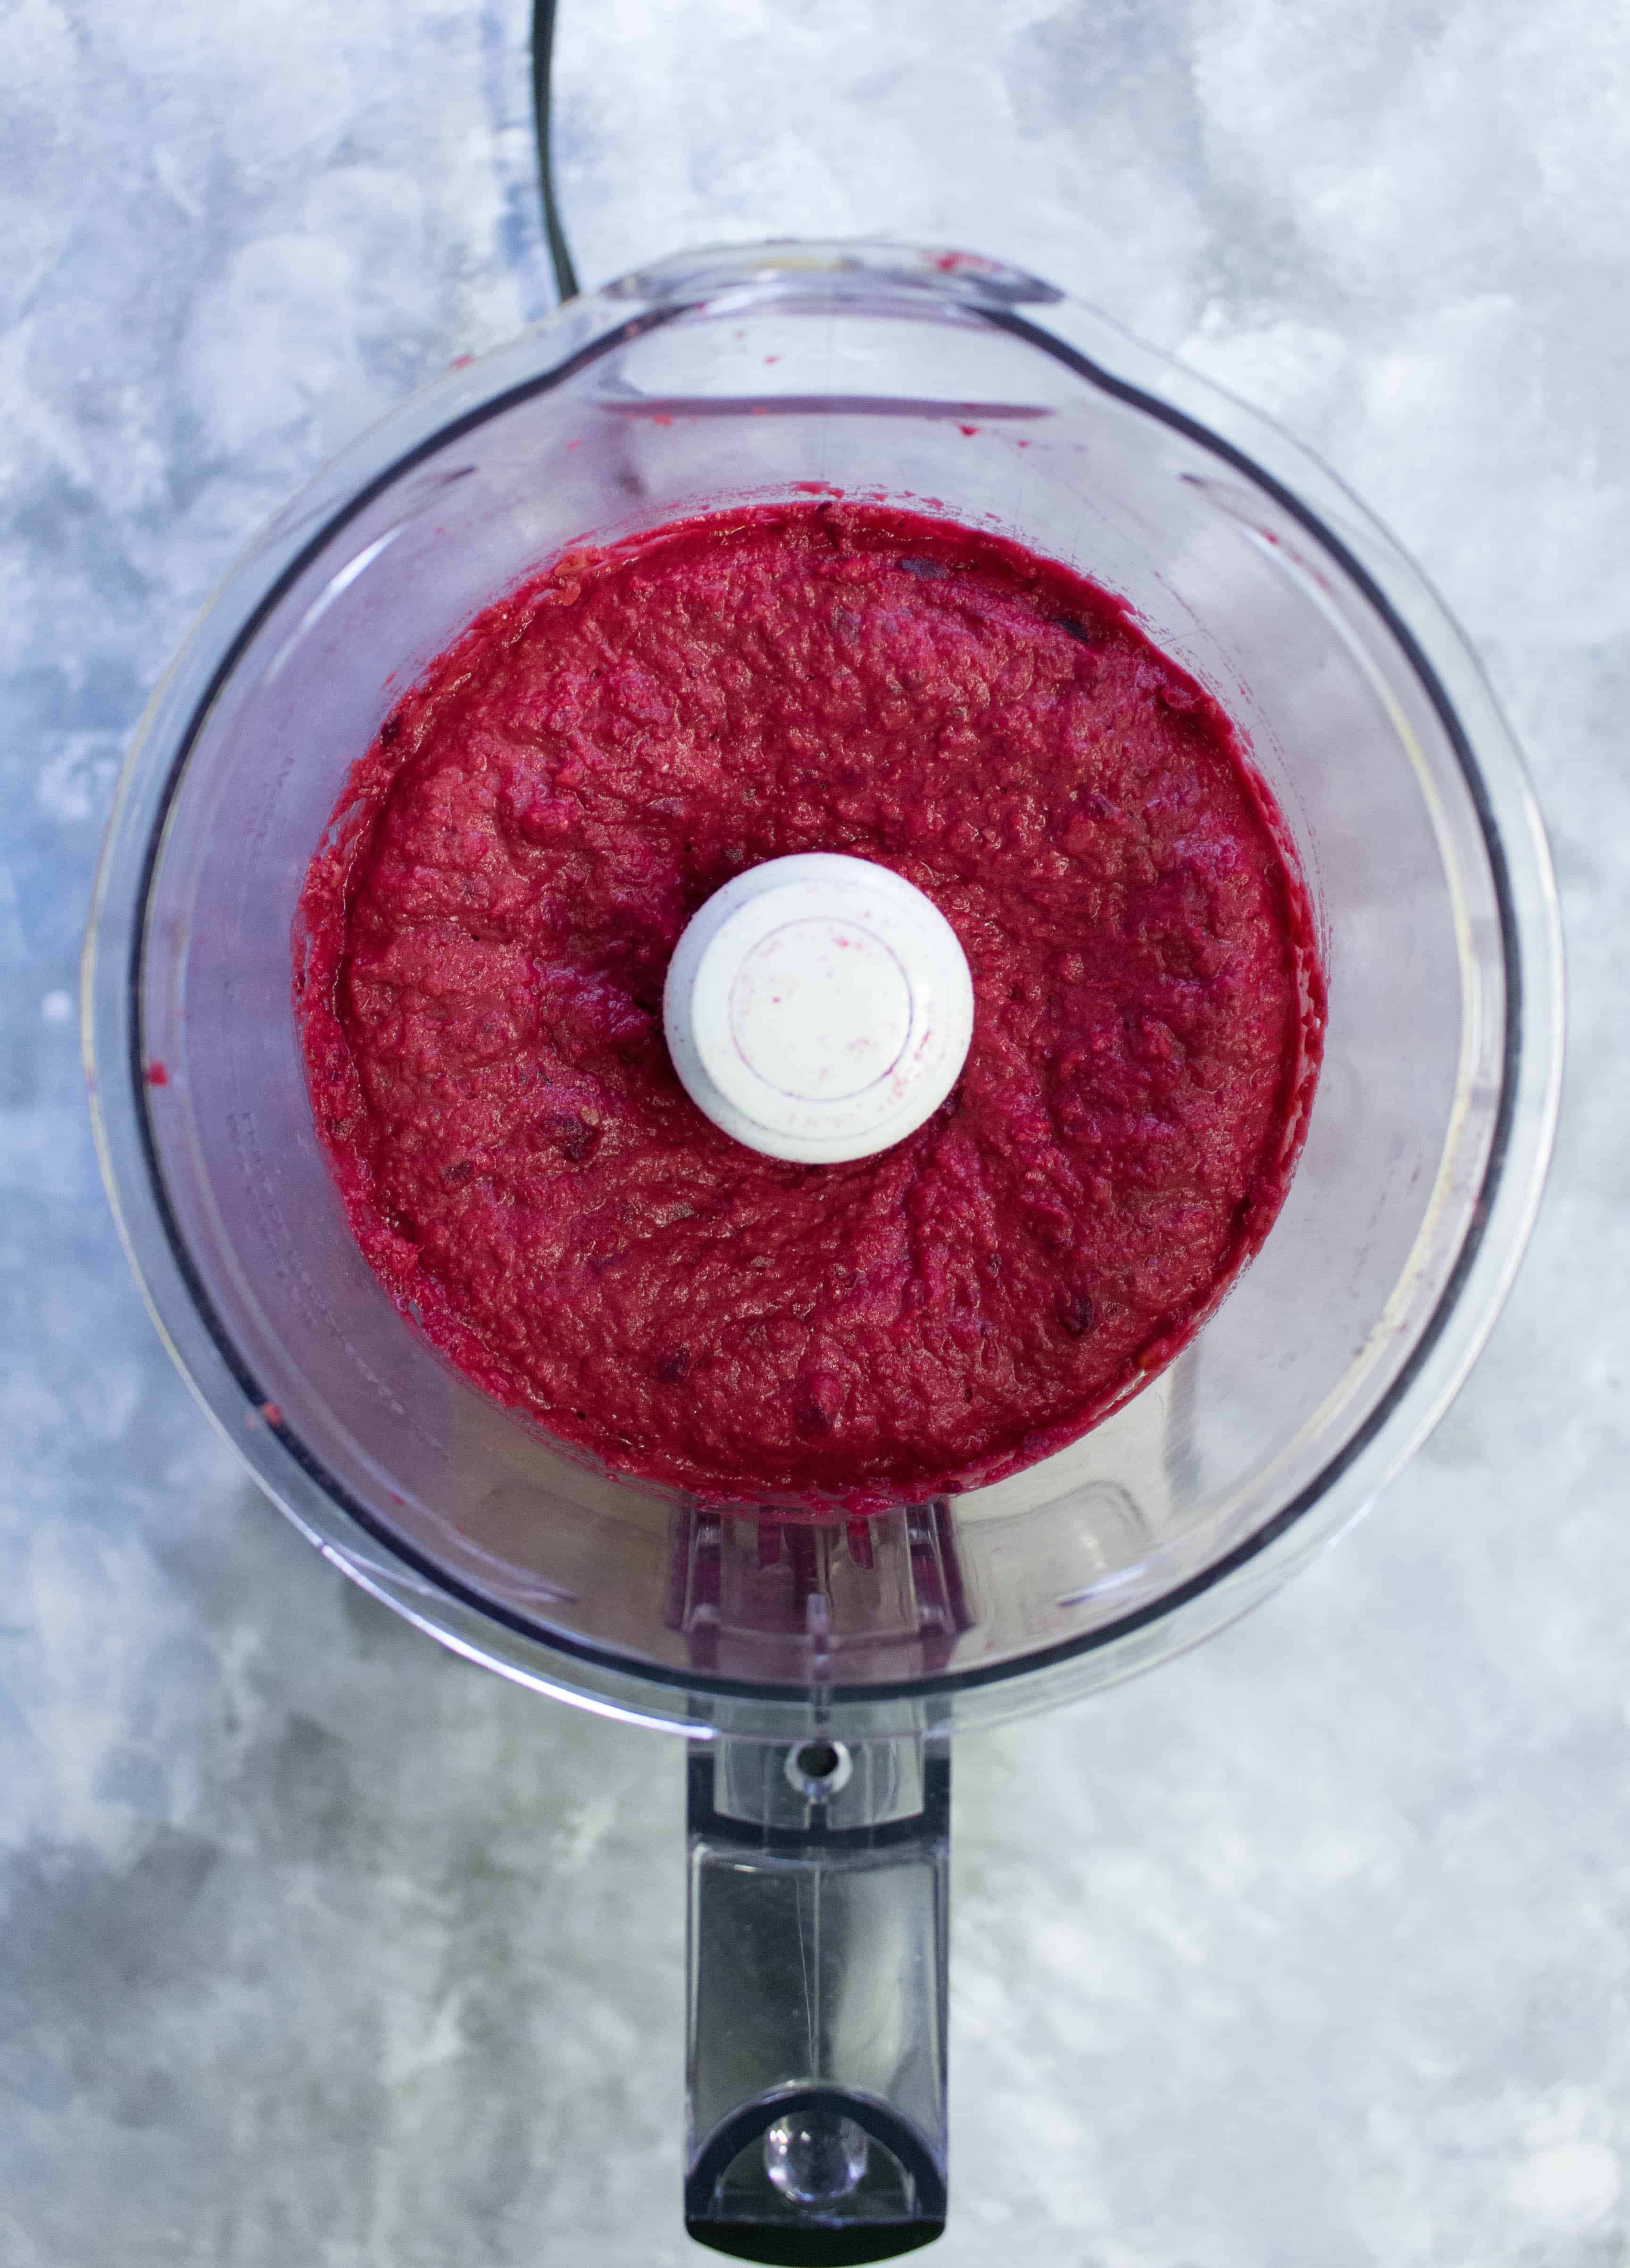 Delicious and easy to make, this tahini free beet hummus will be the star of the show!